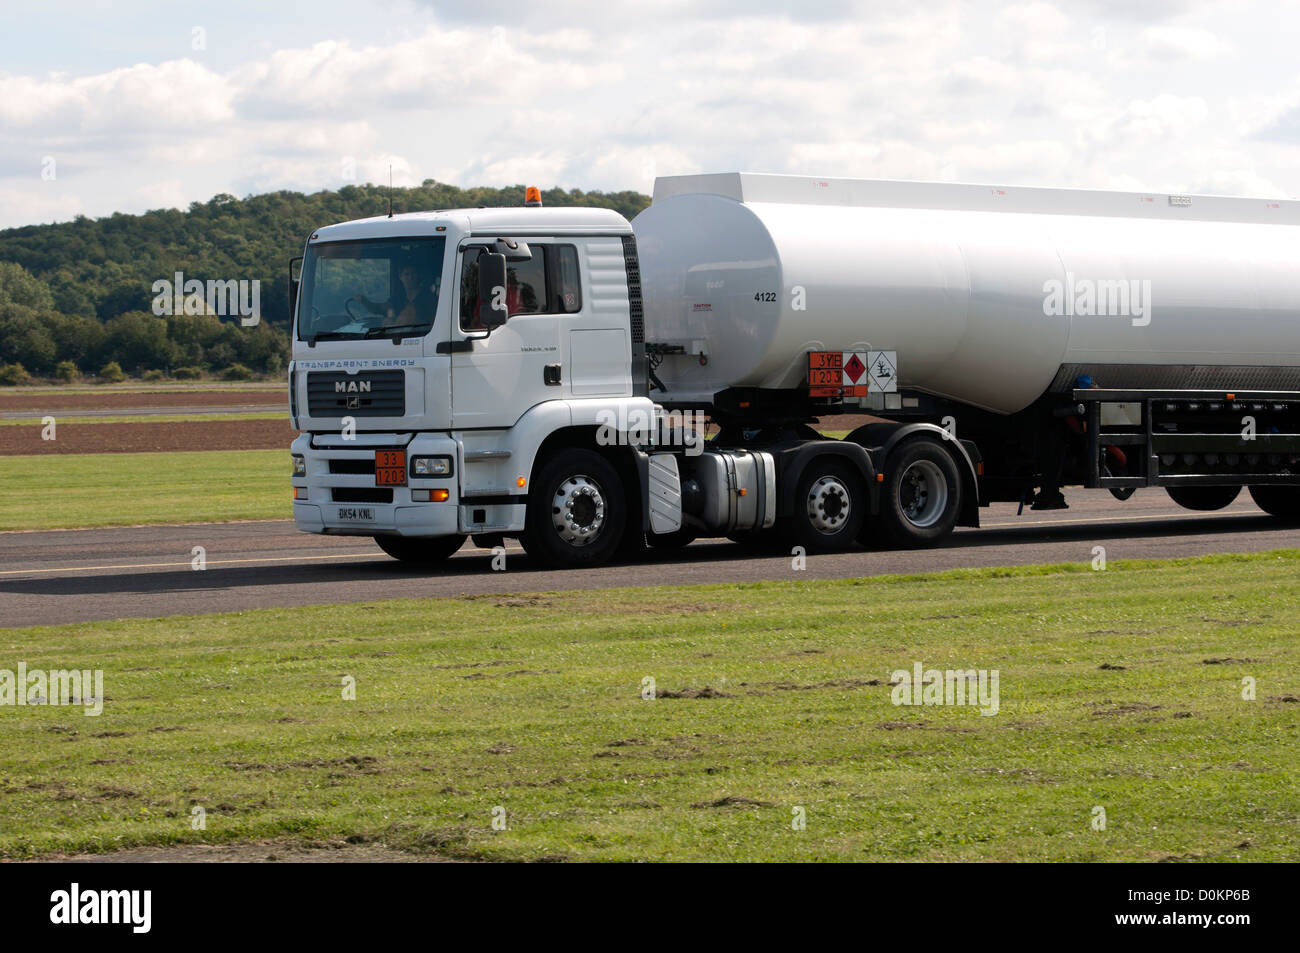 Aviation fuel tanker lorry Stock Photo